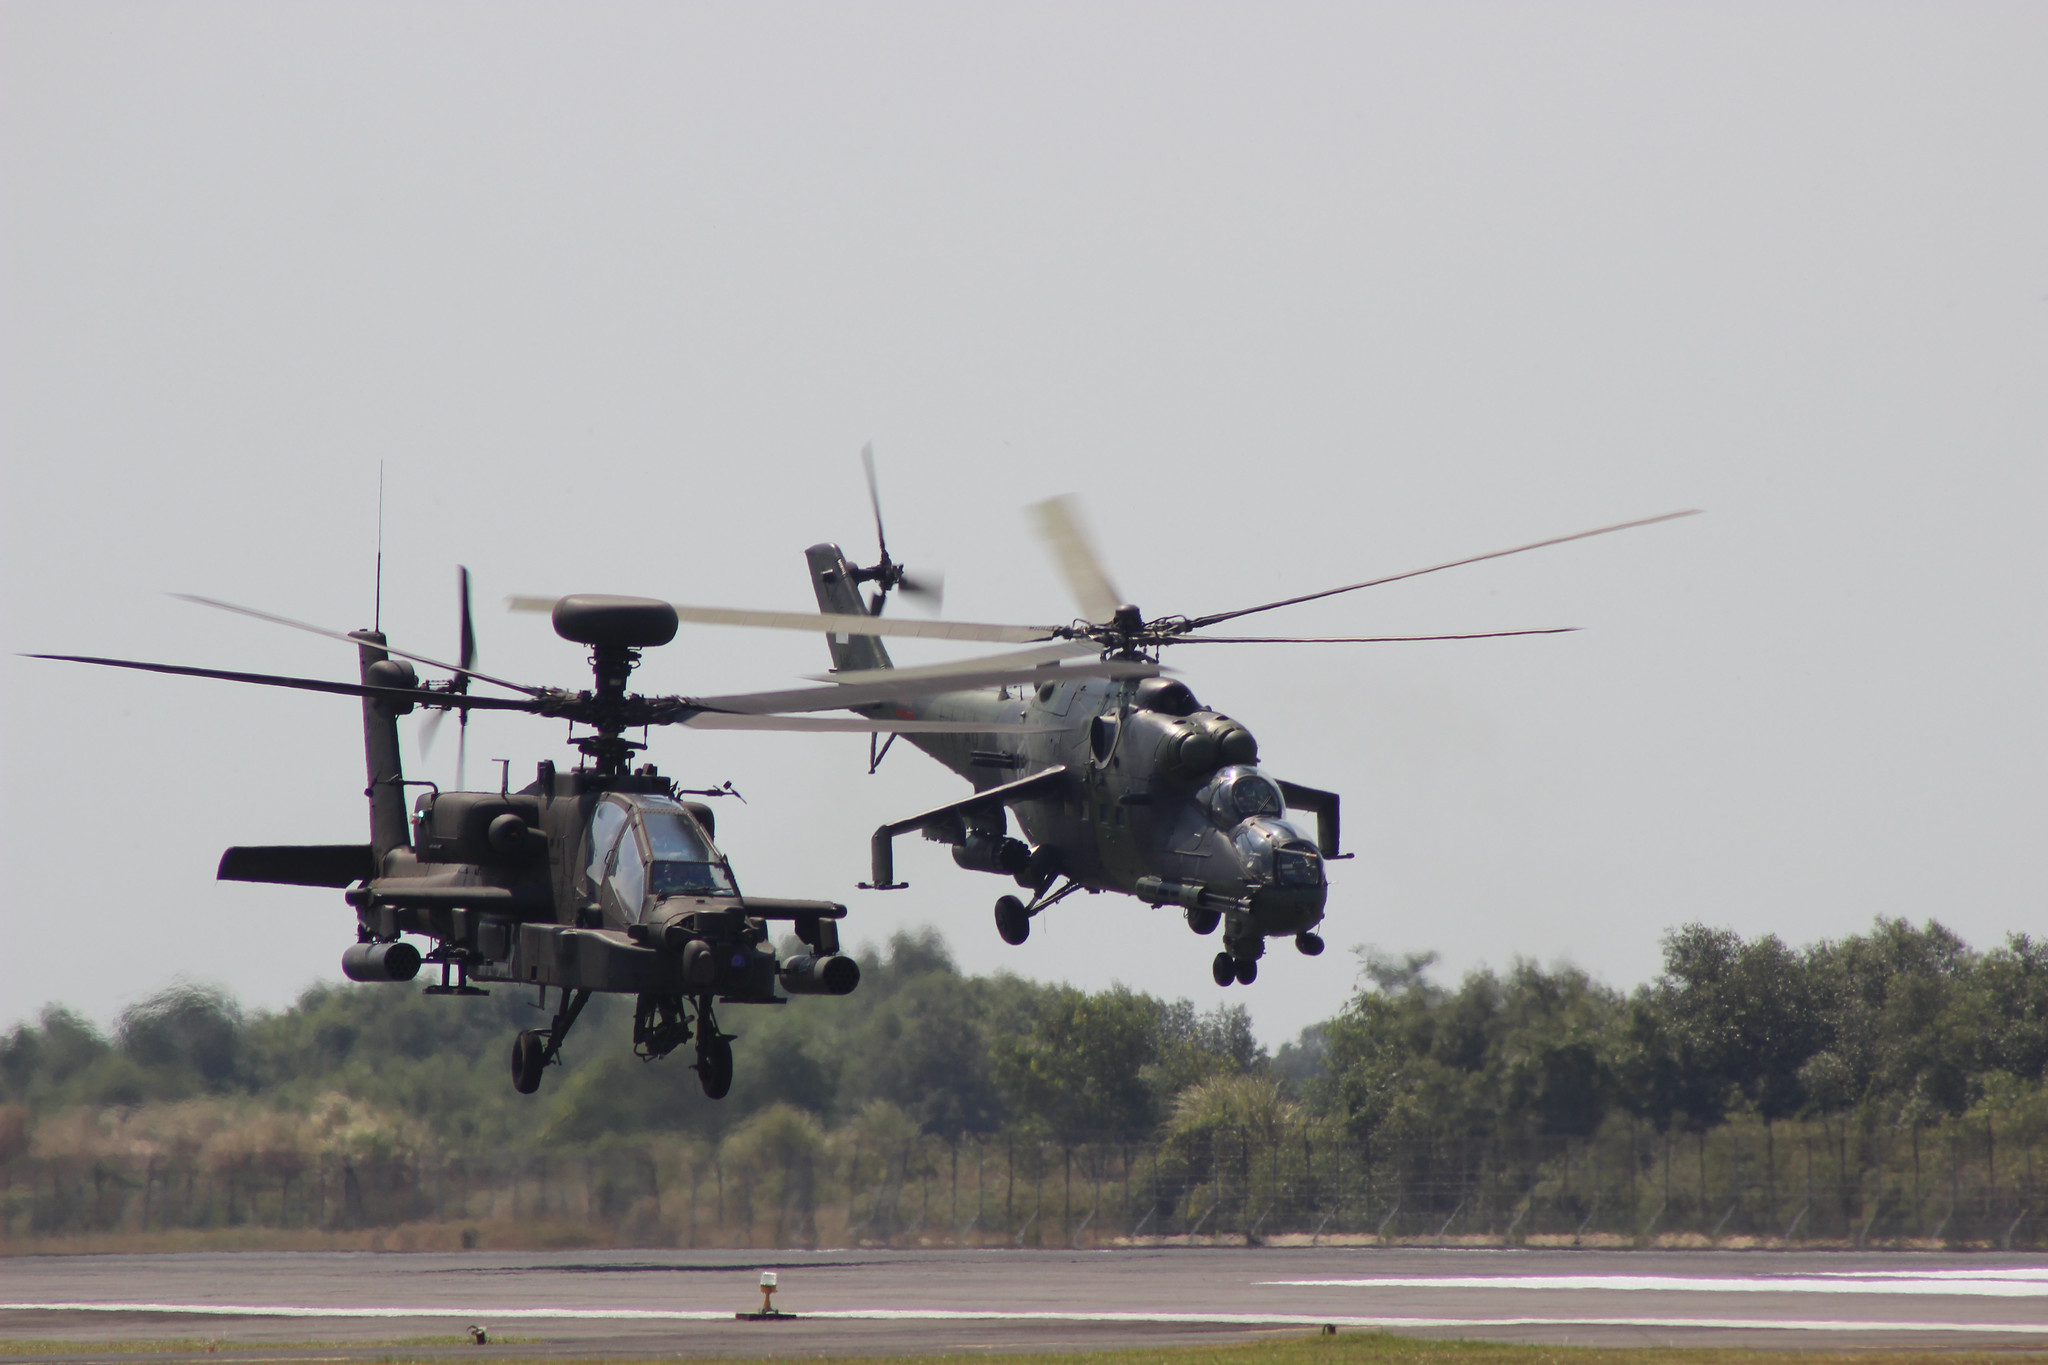 The Mi-35 is the Soviet equivalent of the AH-64.